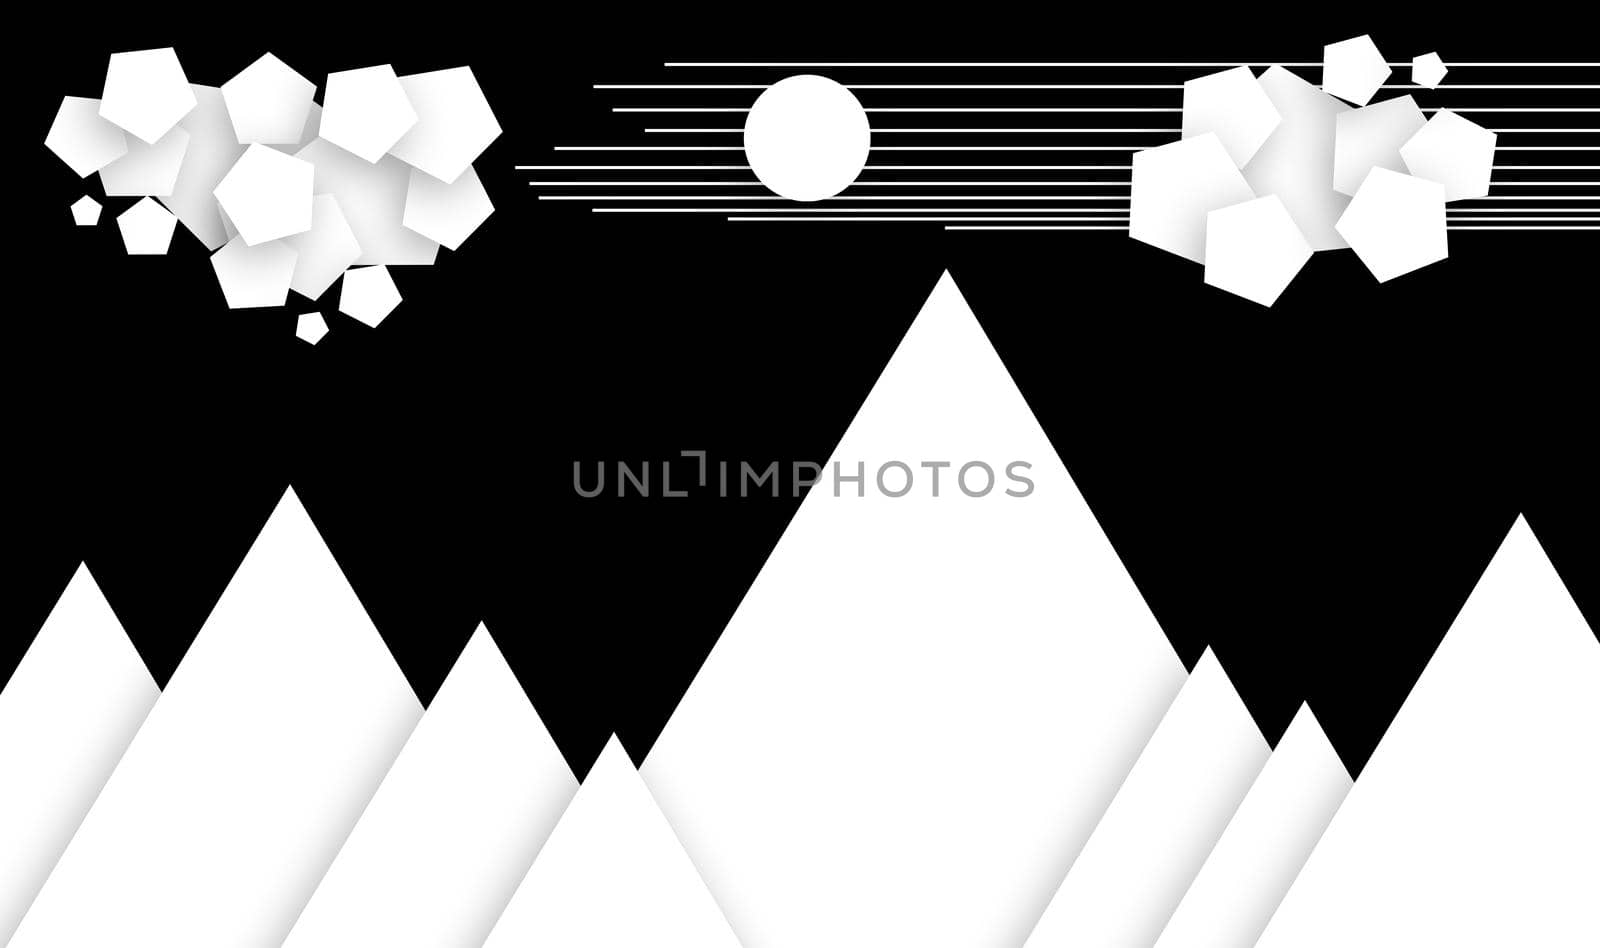 illustration of nature scene made of geometrical shapes with mountain, cloud, sun, the sky in the black isolated background with soft shadow, layered image ready to print for cards, invitation, design print